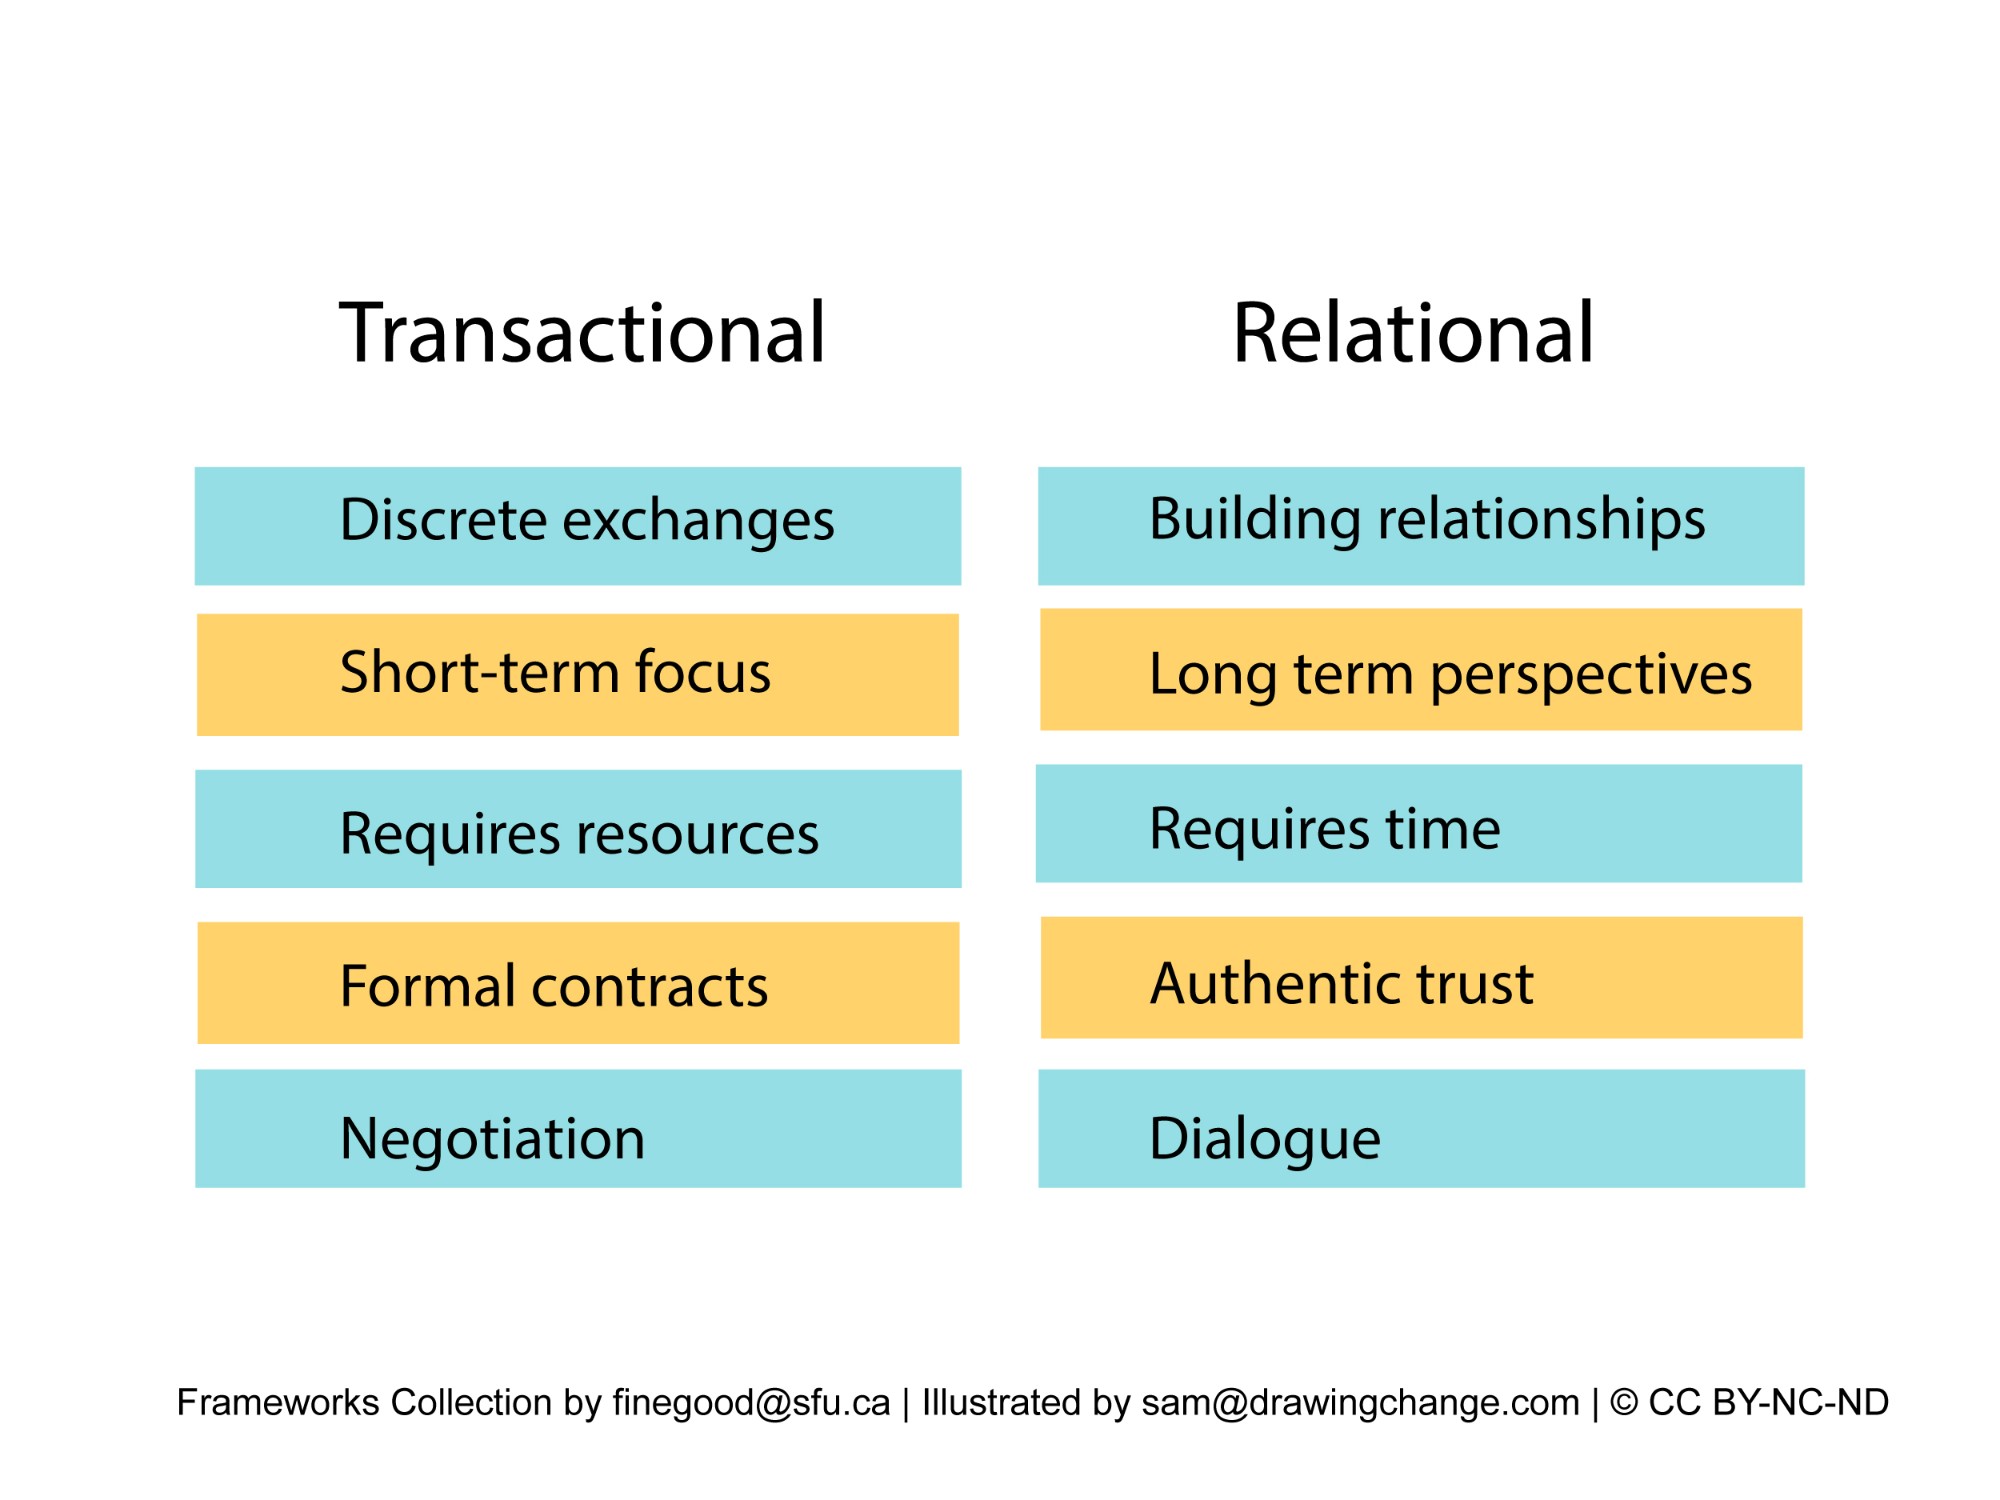 This is an image featuring a table comparing "Transactional" and "Relational" attributes in two columns.  The left column is titled Transactional and the right column is labelled relational.  Paired left to right are:  Discrete exchanges to Building Relationships; Short-term focus to Long term perspective Requires resources to requires time Formal contracts to Authentic trust Negotiation to Dialogue  The bottom of the image includes the credits: "Frameworks Collection by finegood@sfu.ca | Illustrated by sam@drawingchange.com | © CC BY-NC-ND".